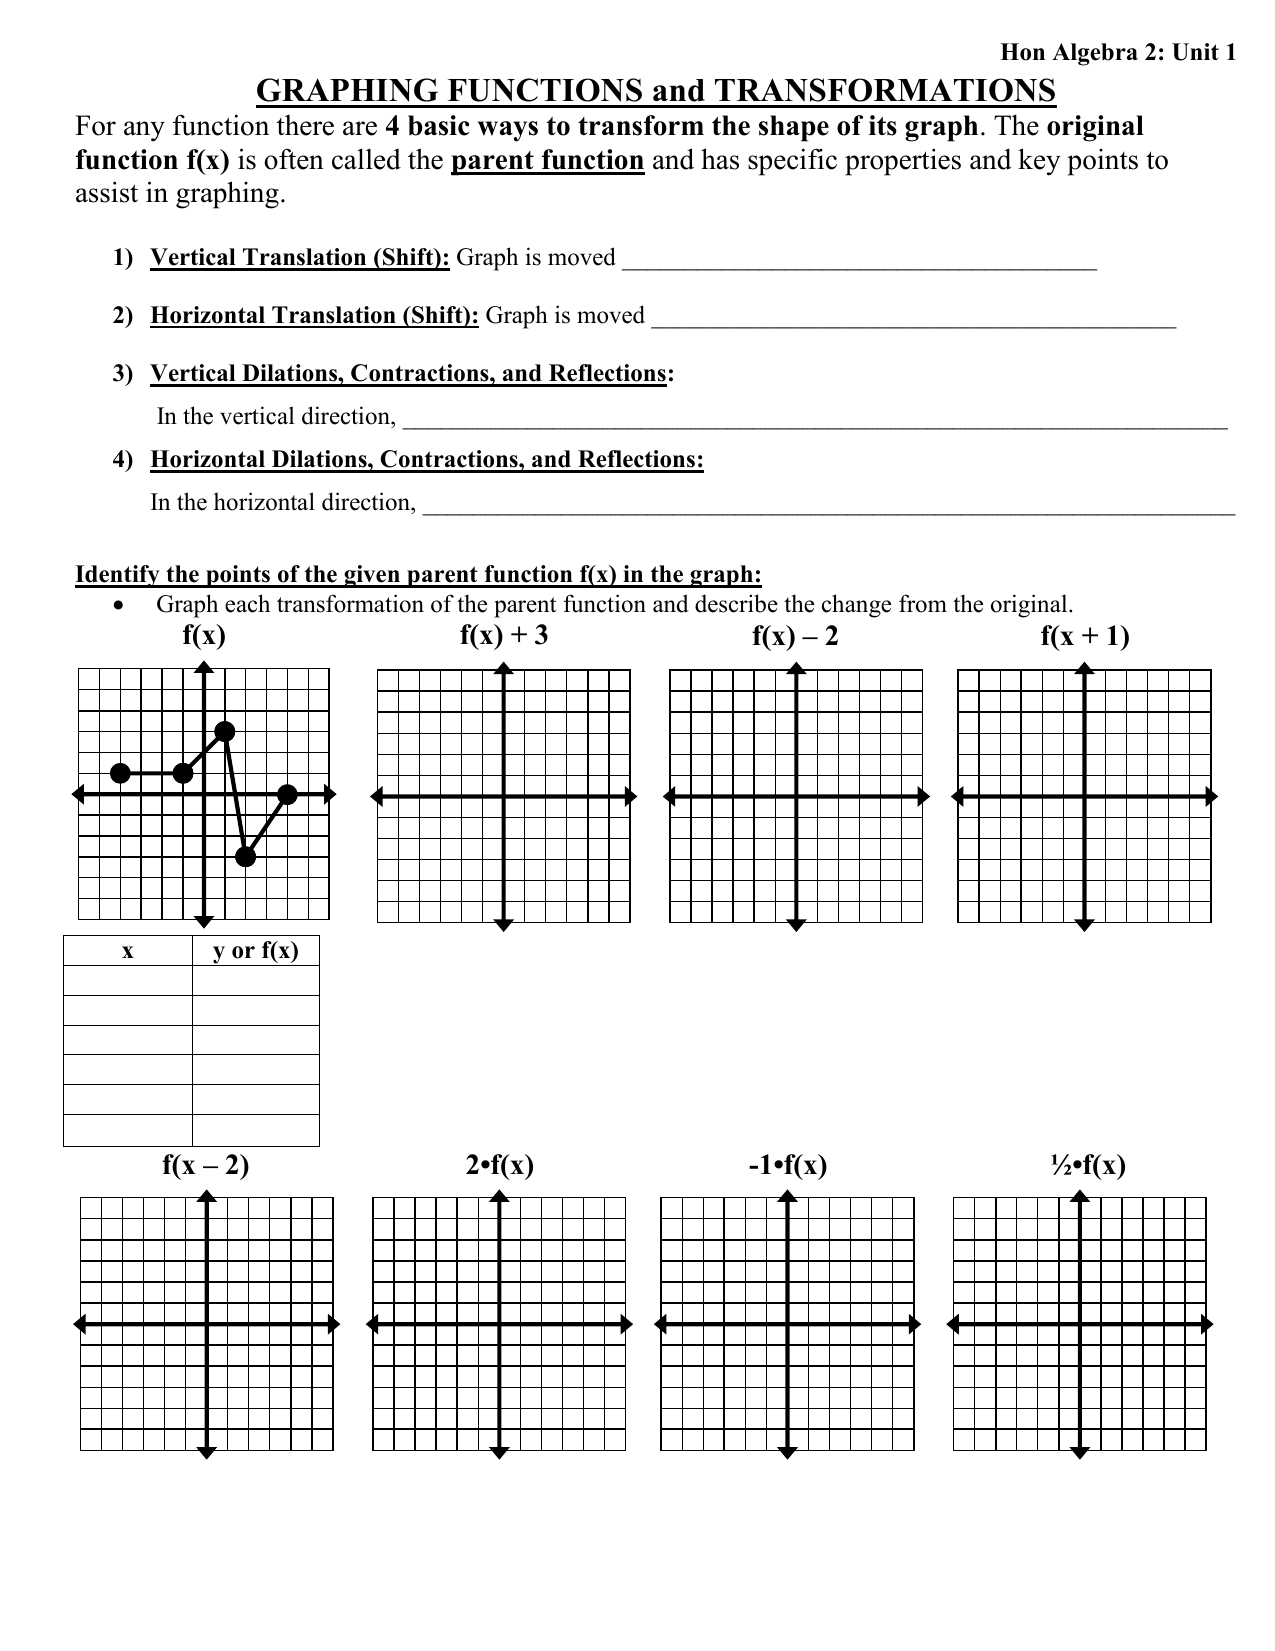 Hon Algebra 22: Unit 22 GRAPHING FUNCTIONS and With Regard To Transformations Of Functions Worksheet